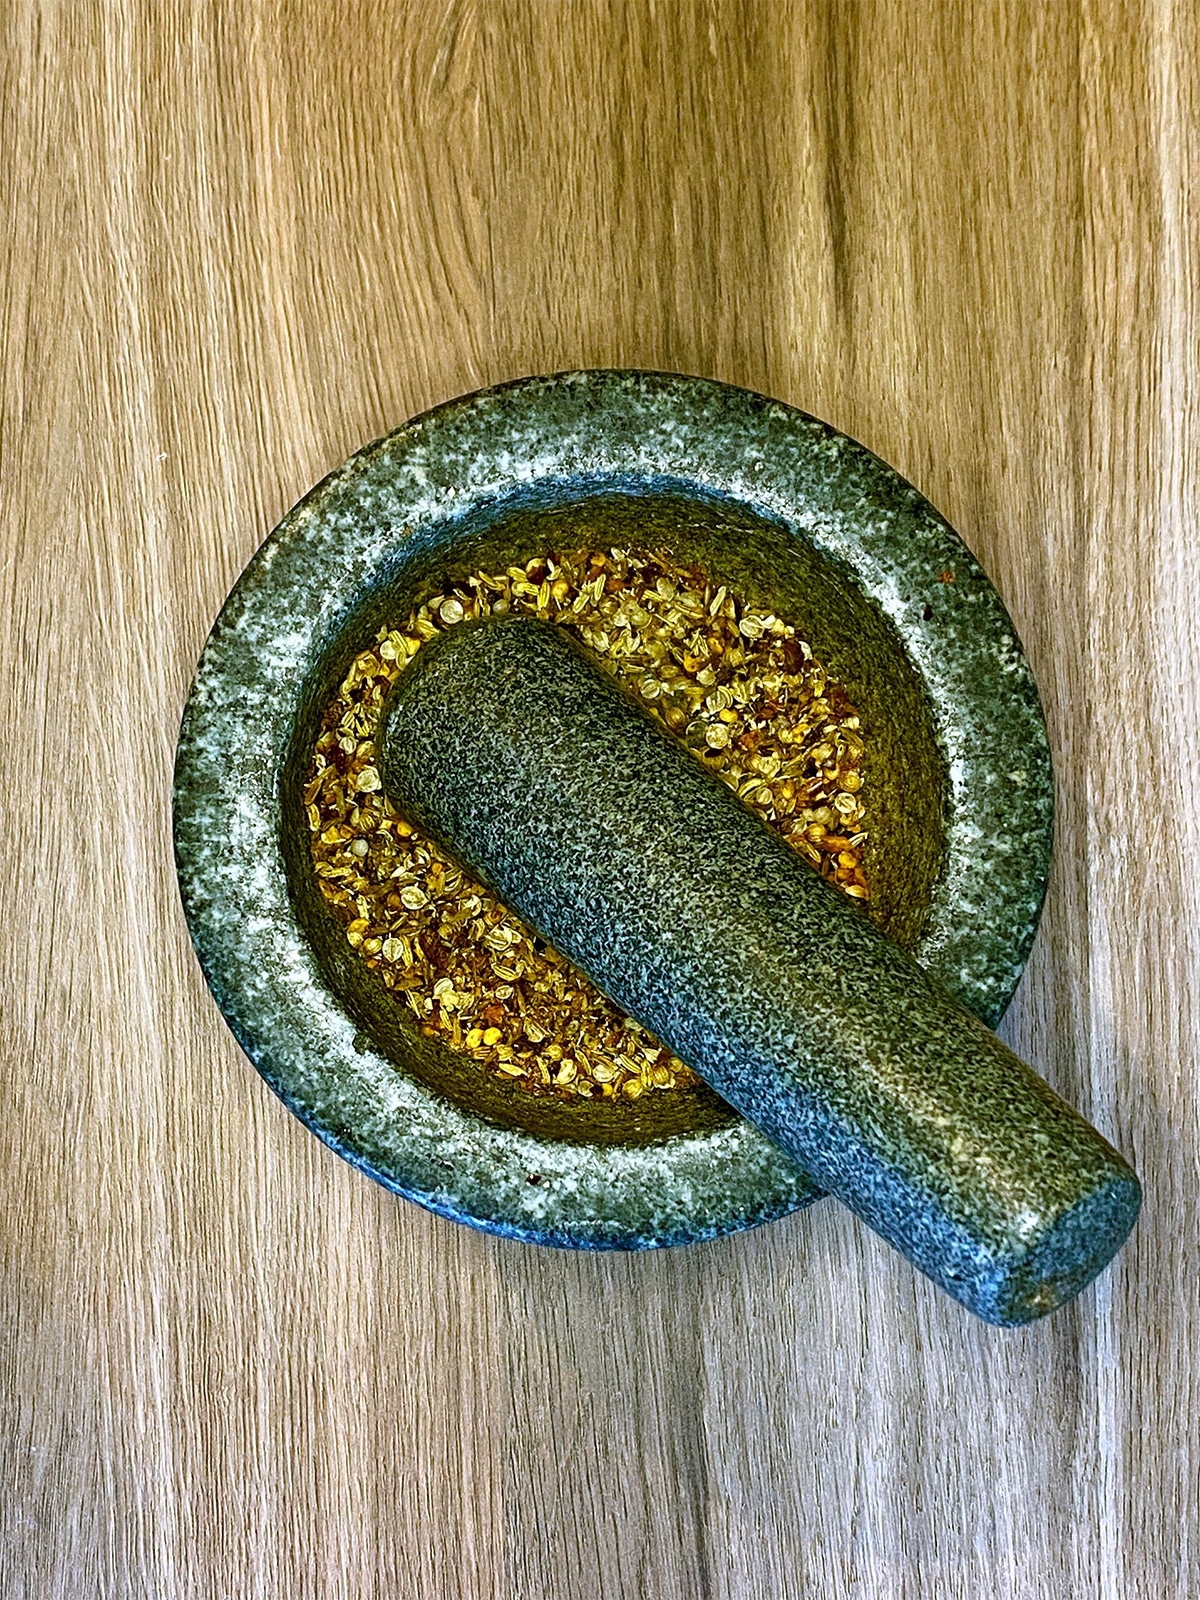 Toasted spices in a pestle and mortar.